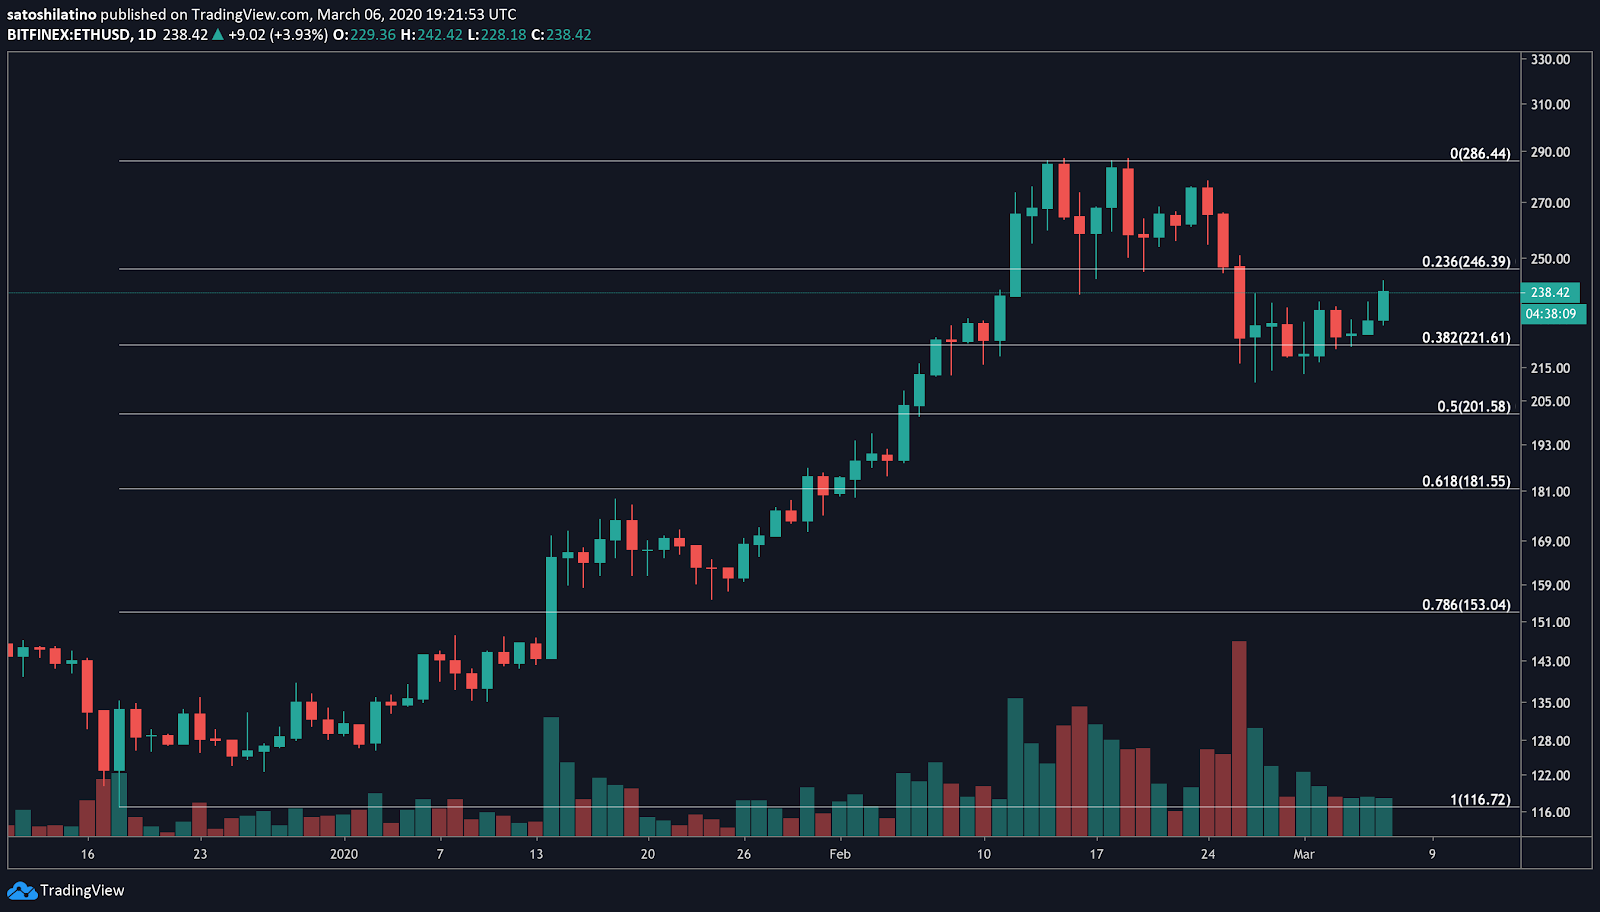 XRP / USD price chart by TradingView